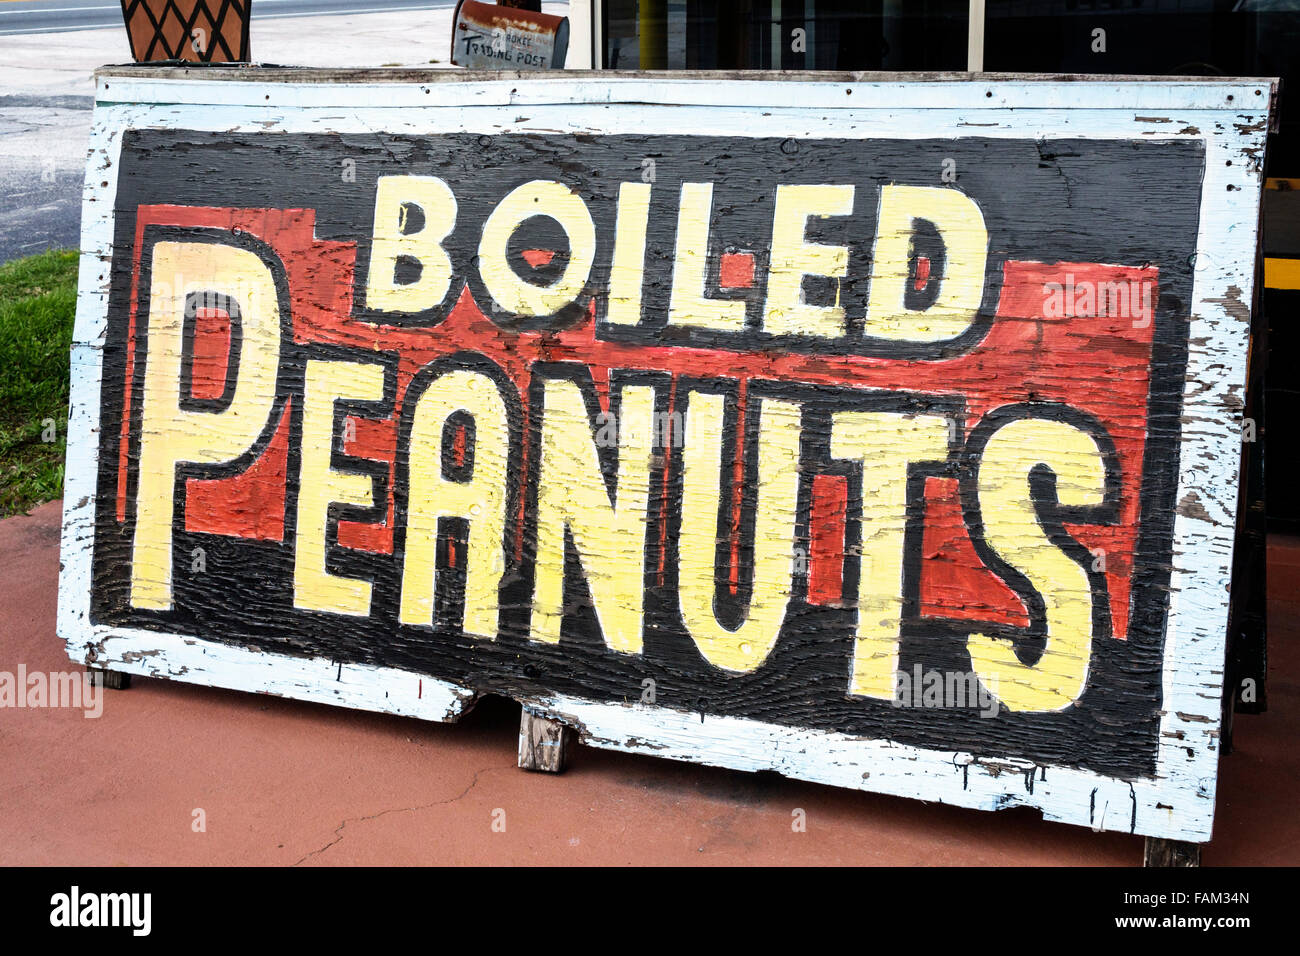 Florida Wildwood,roadside,sign,boiled peanuts,hand painted,visitors travel traveling tour tourist tourism landmark landmarks culture cultural,vacation Stock Photo